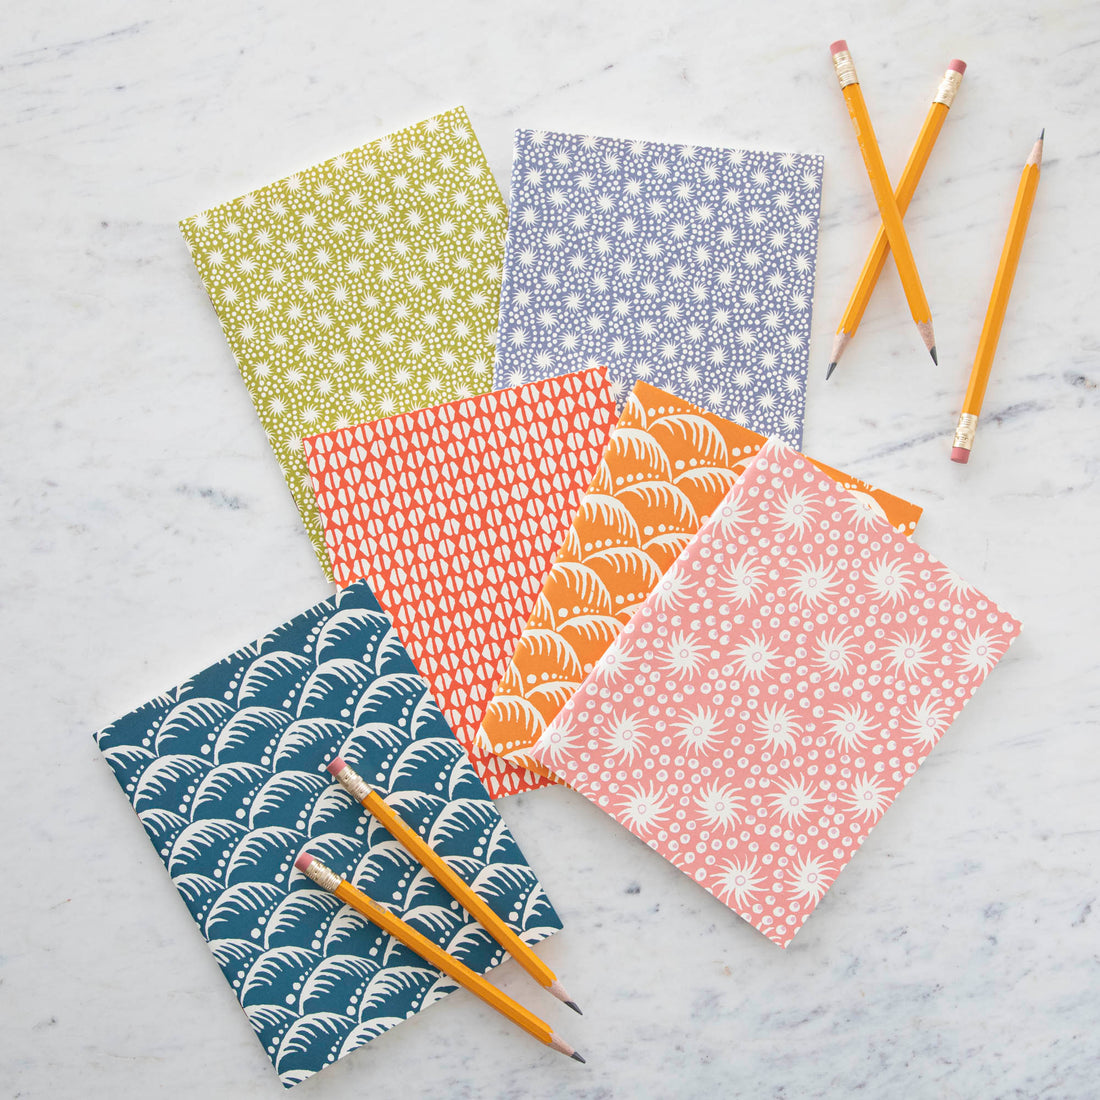 Five colorful Cambridge Imprint Blank Notebooks with patterned covers and three pencils on a marble surface.